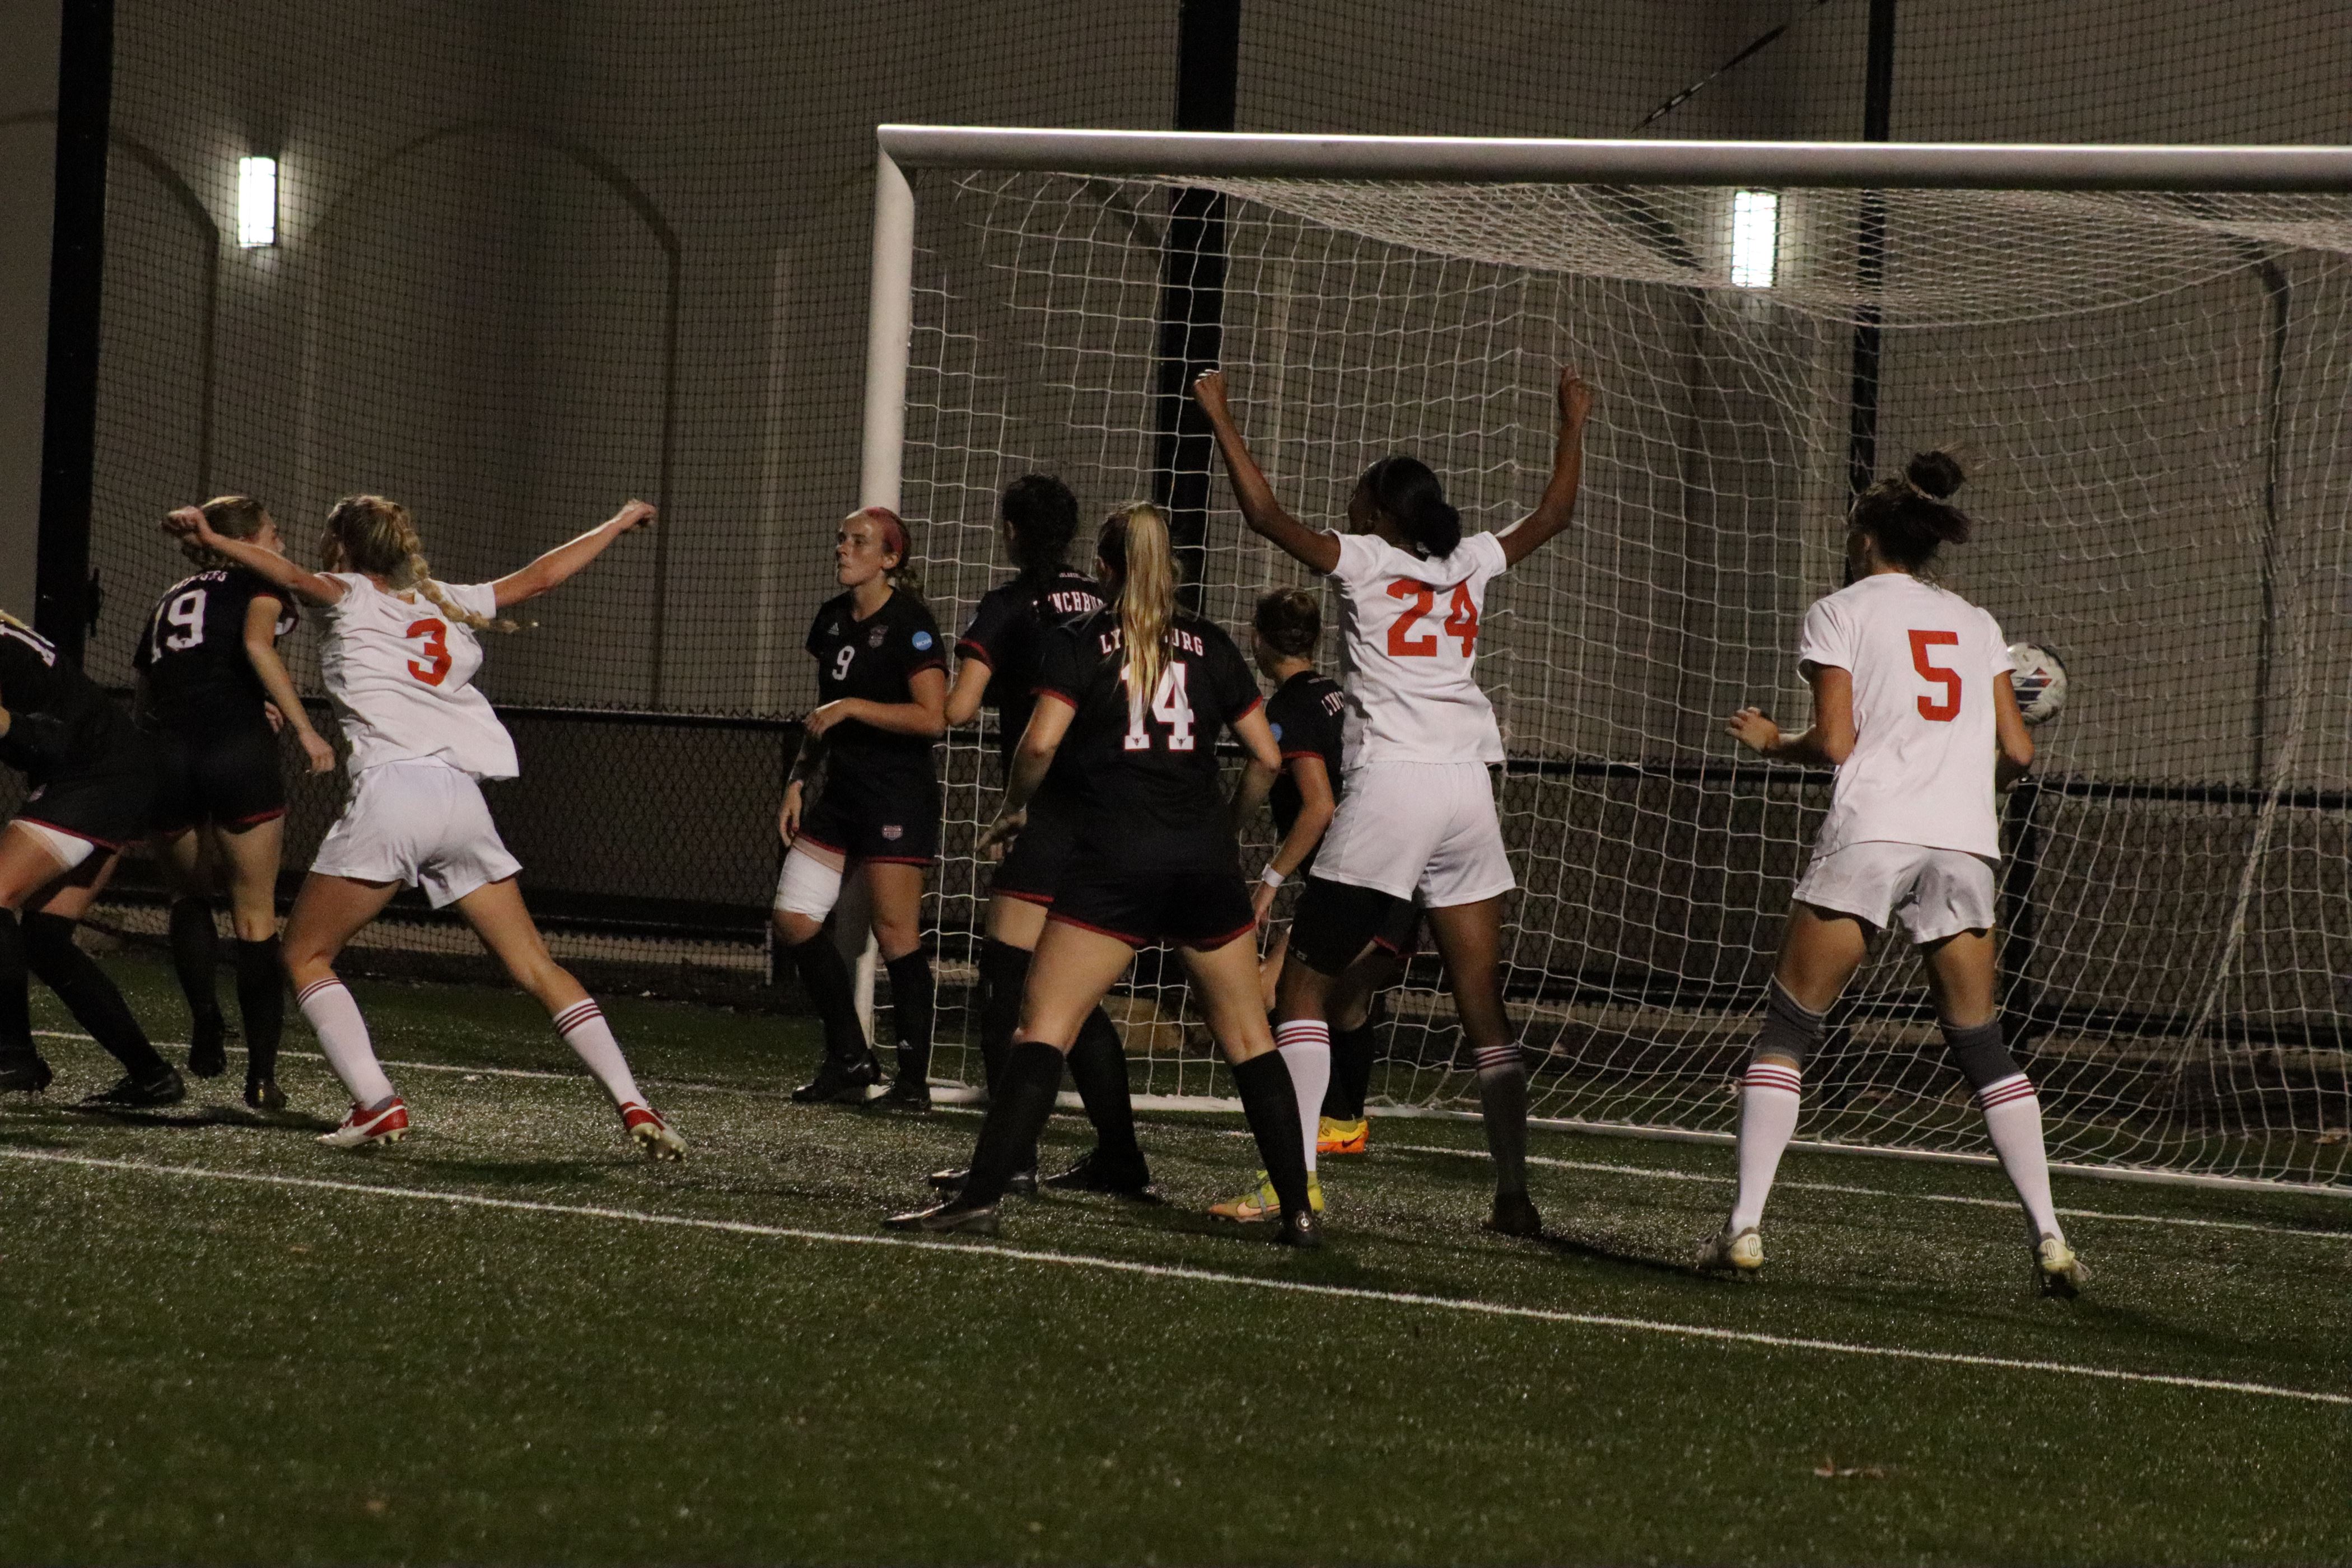 Emmi Denovellis kicked a perfect corner to Kerri Driscoll who headed it in for a goal. Trevor Giesberg | The Montclarion